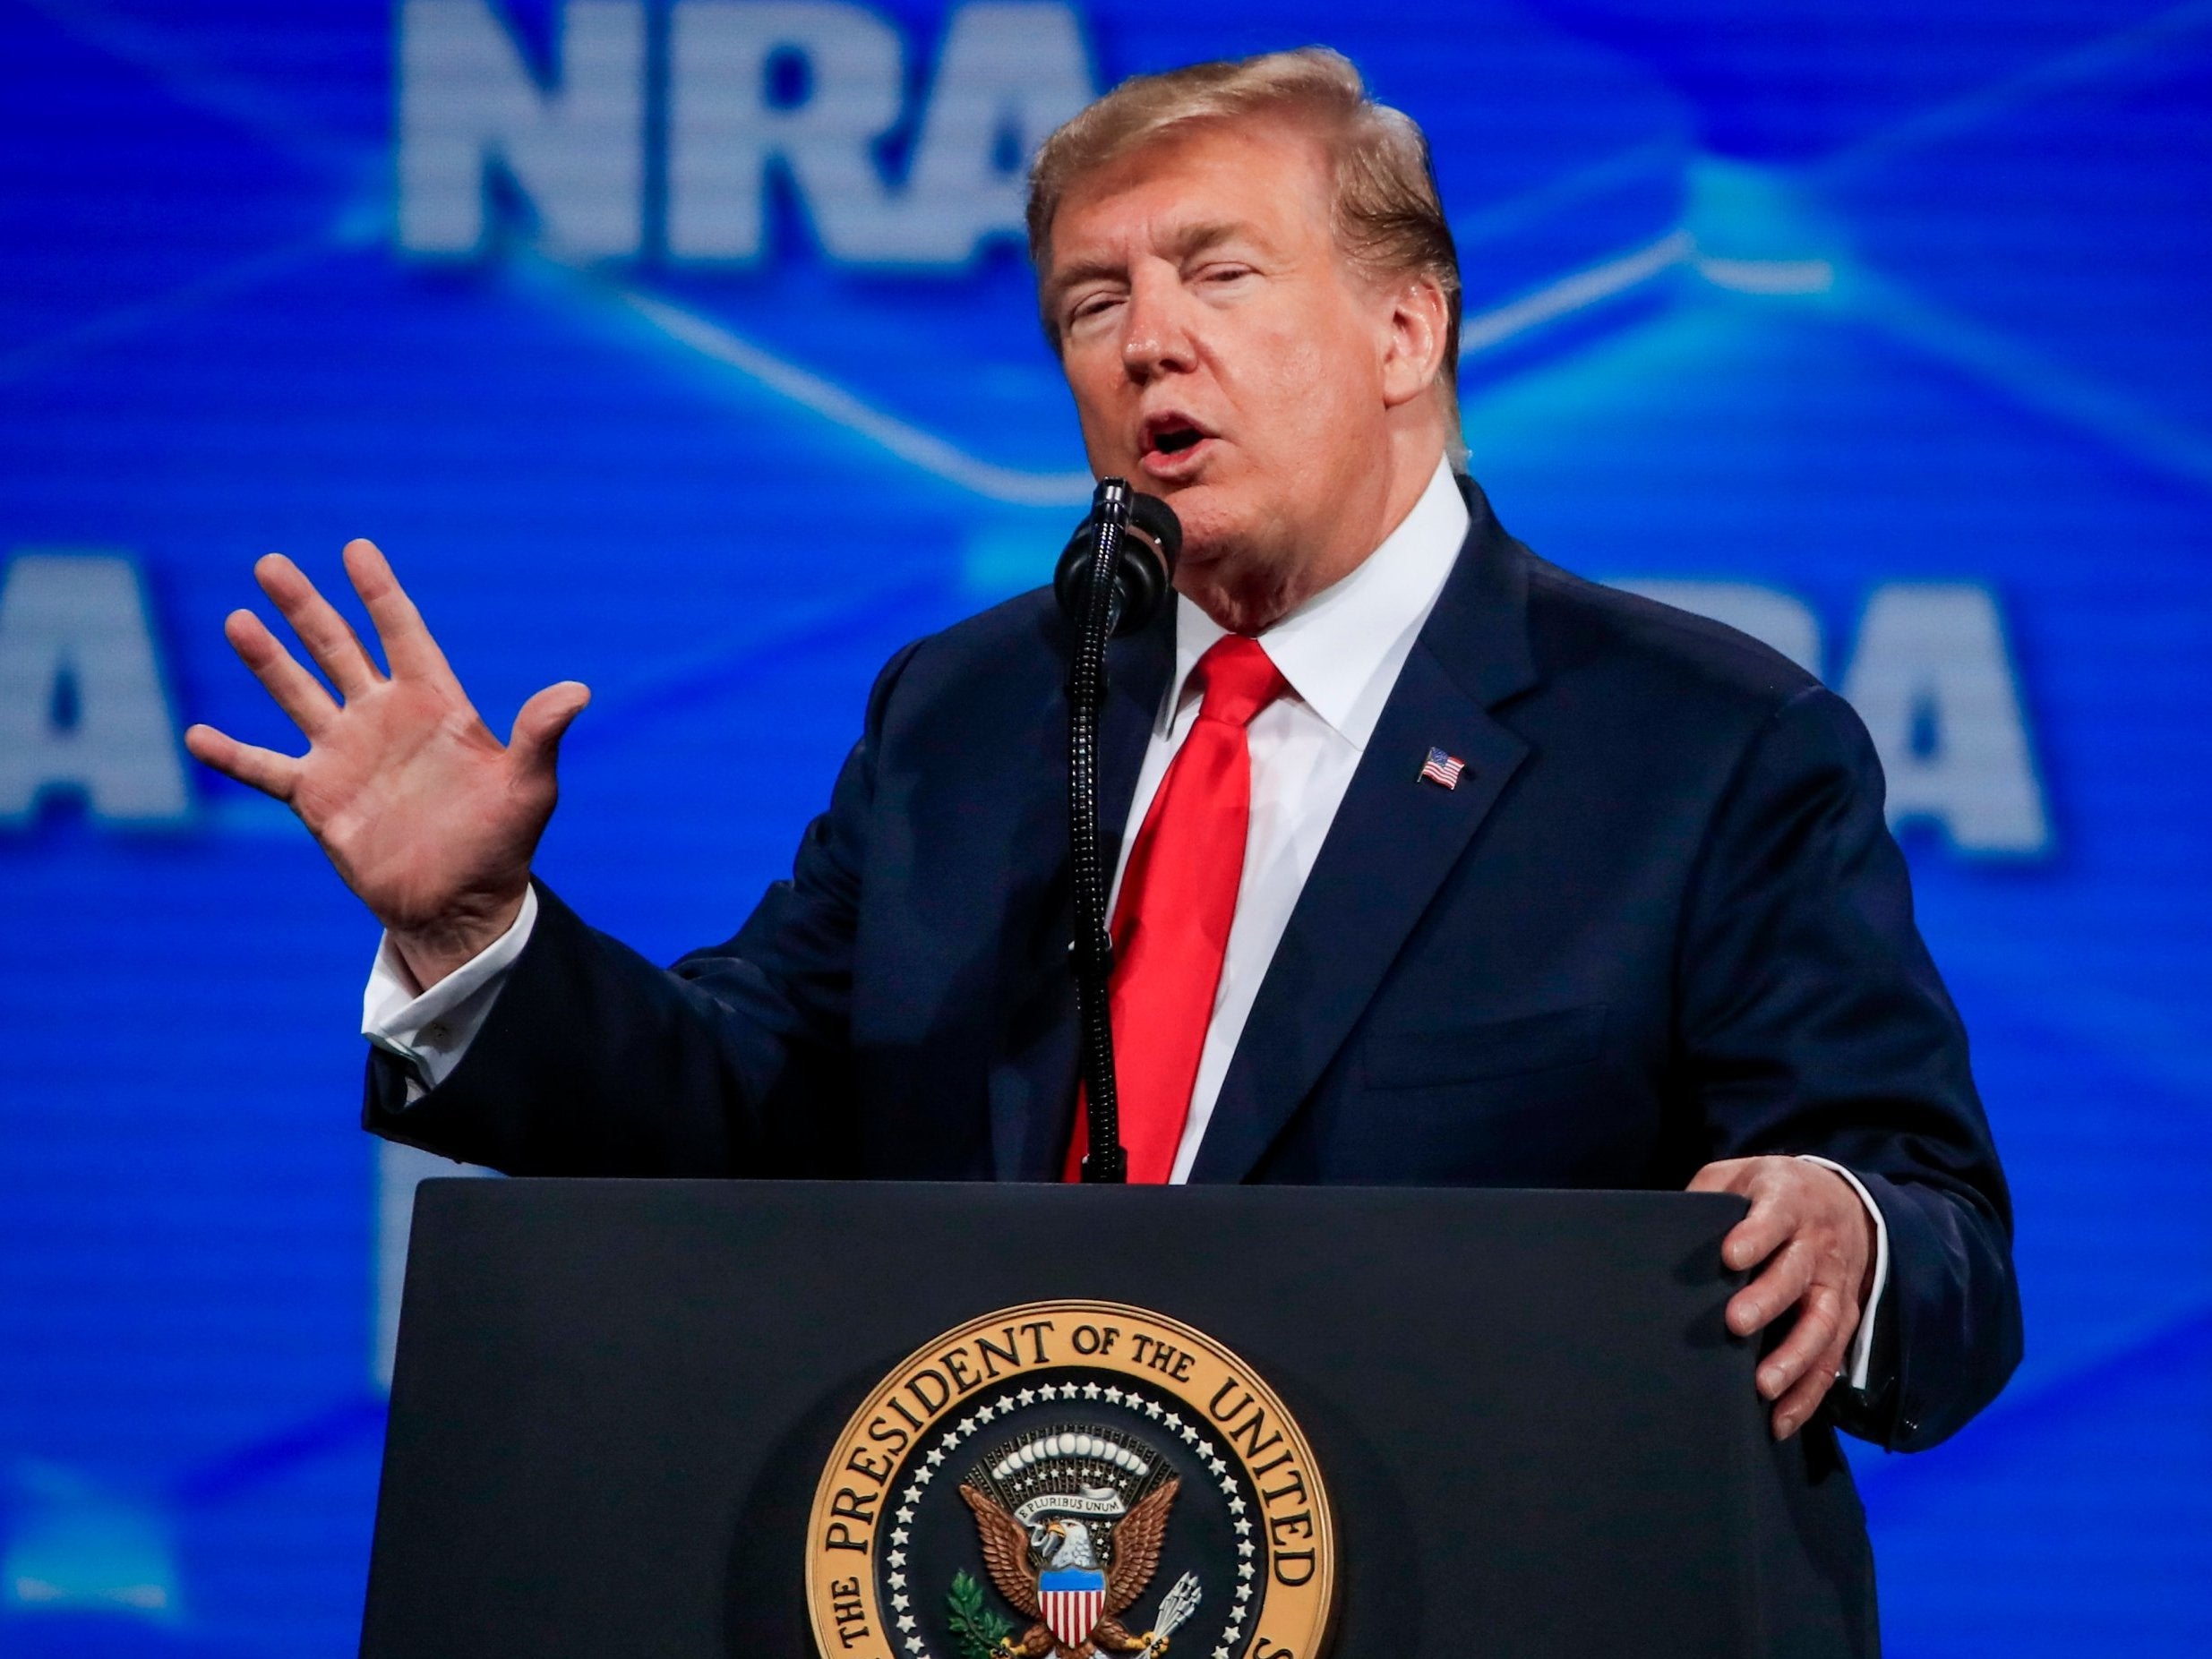 Trump re-enacts France terror attack with shooting gesture as he tells NRA convention he will pull US out of UN Arms Trade Treaty